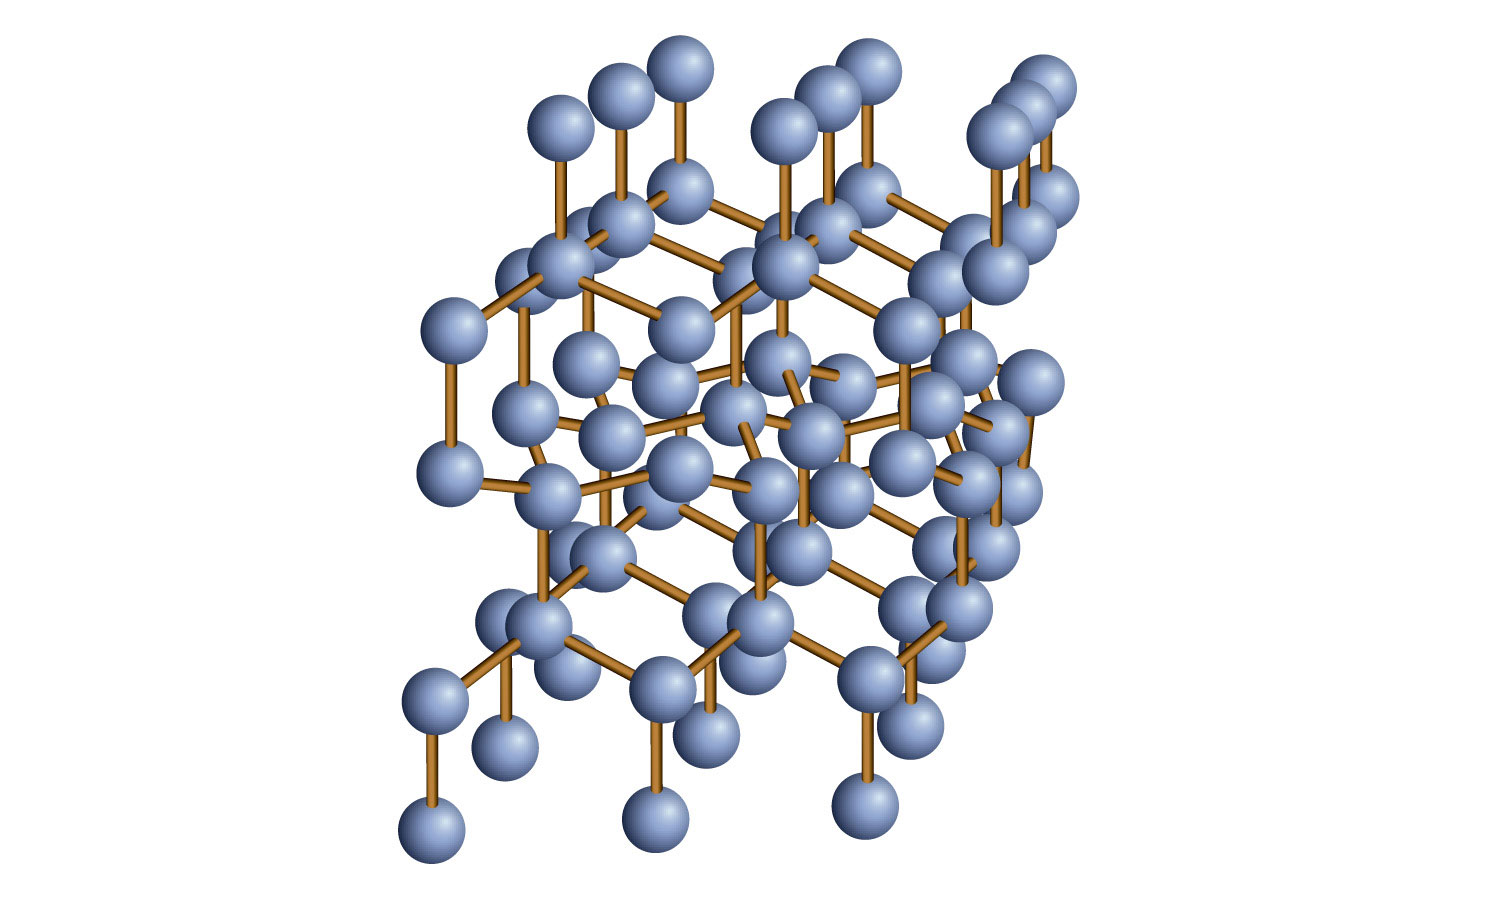 Three-dimensional model of the molecular structure of diamond.